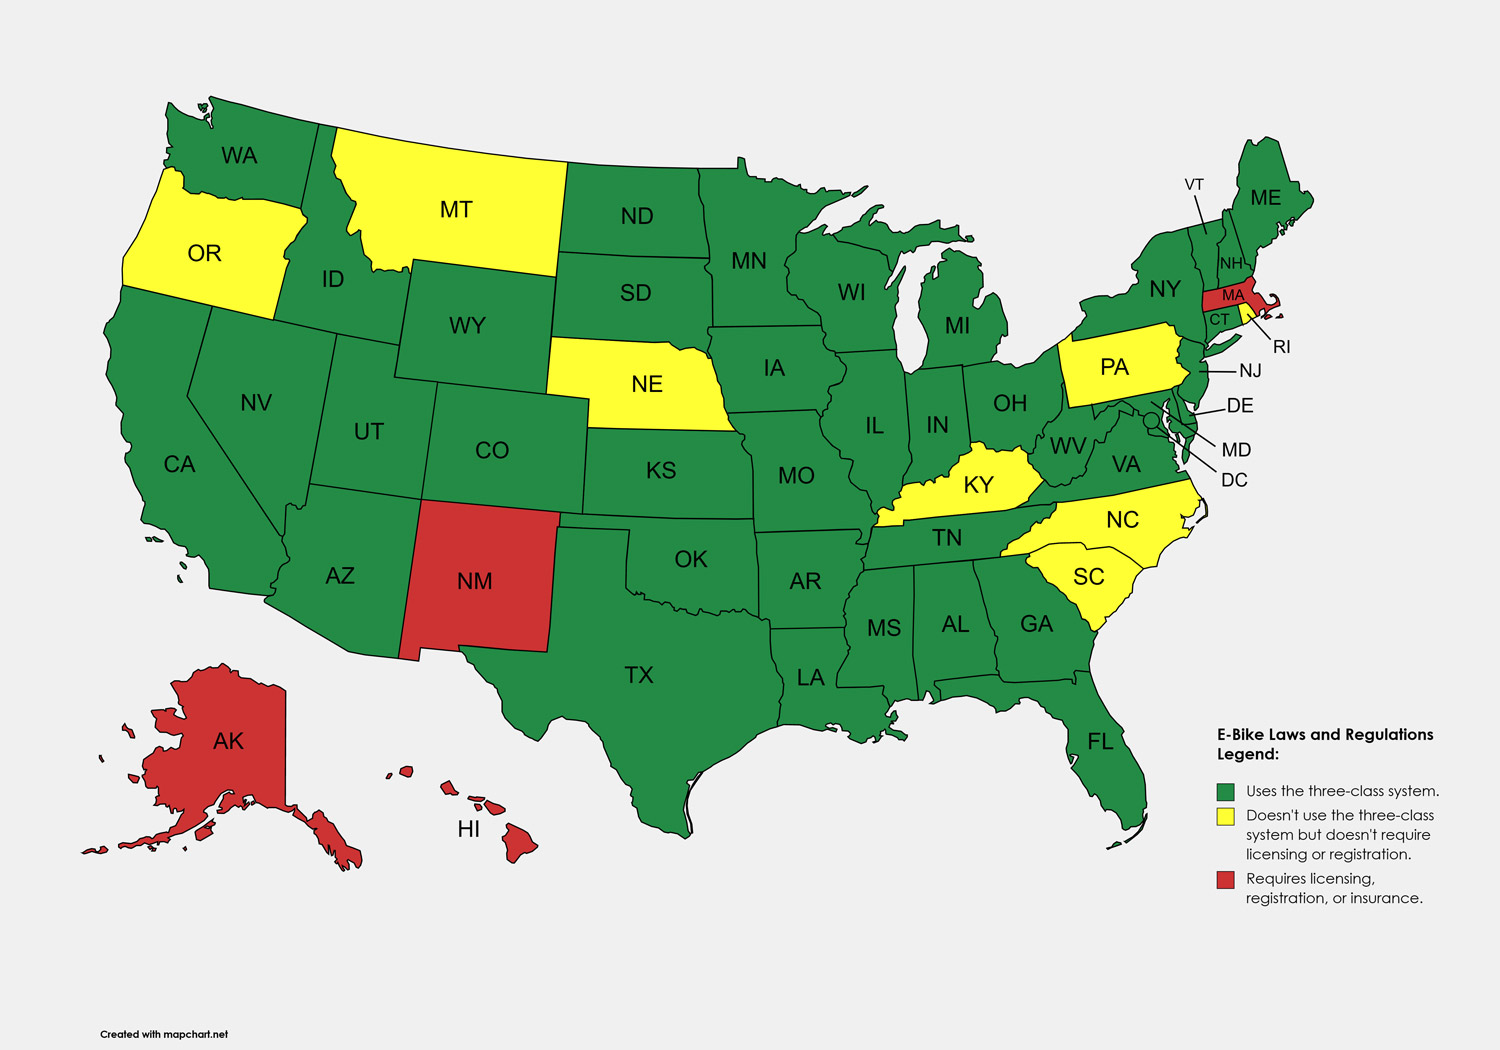 map of the united states showing ebike laws and regulations by state